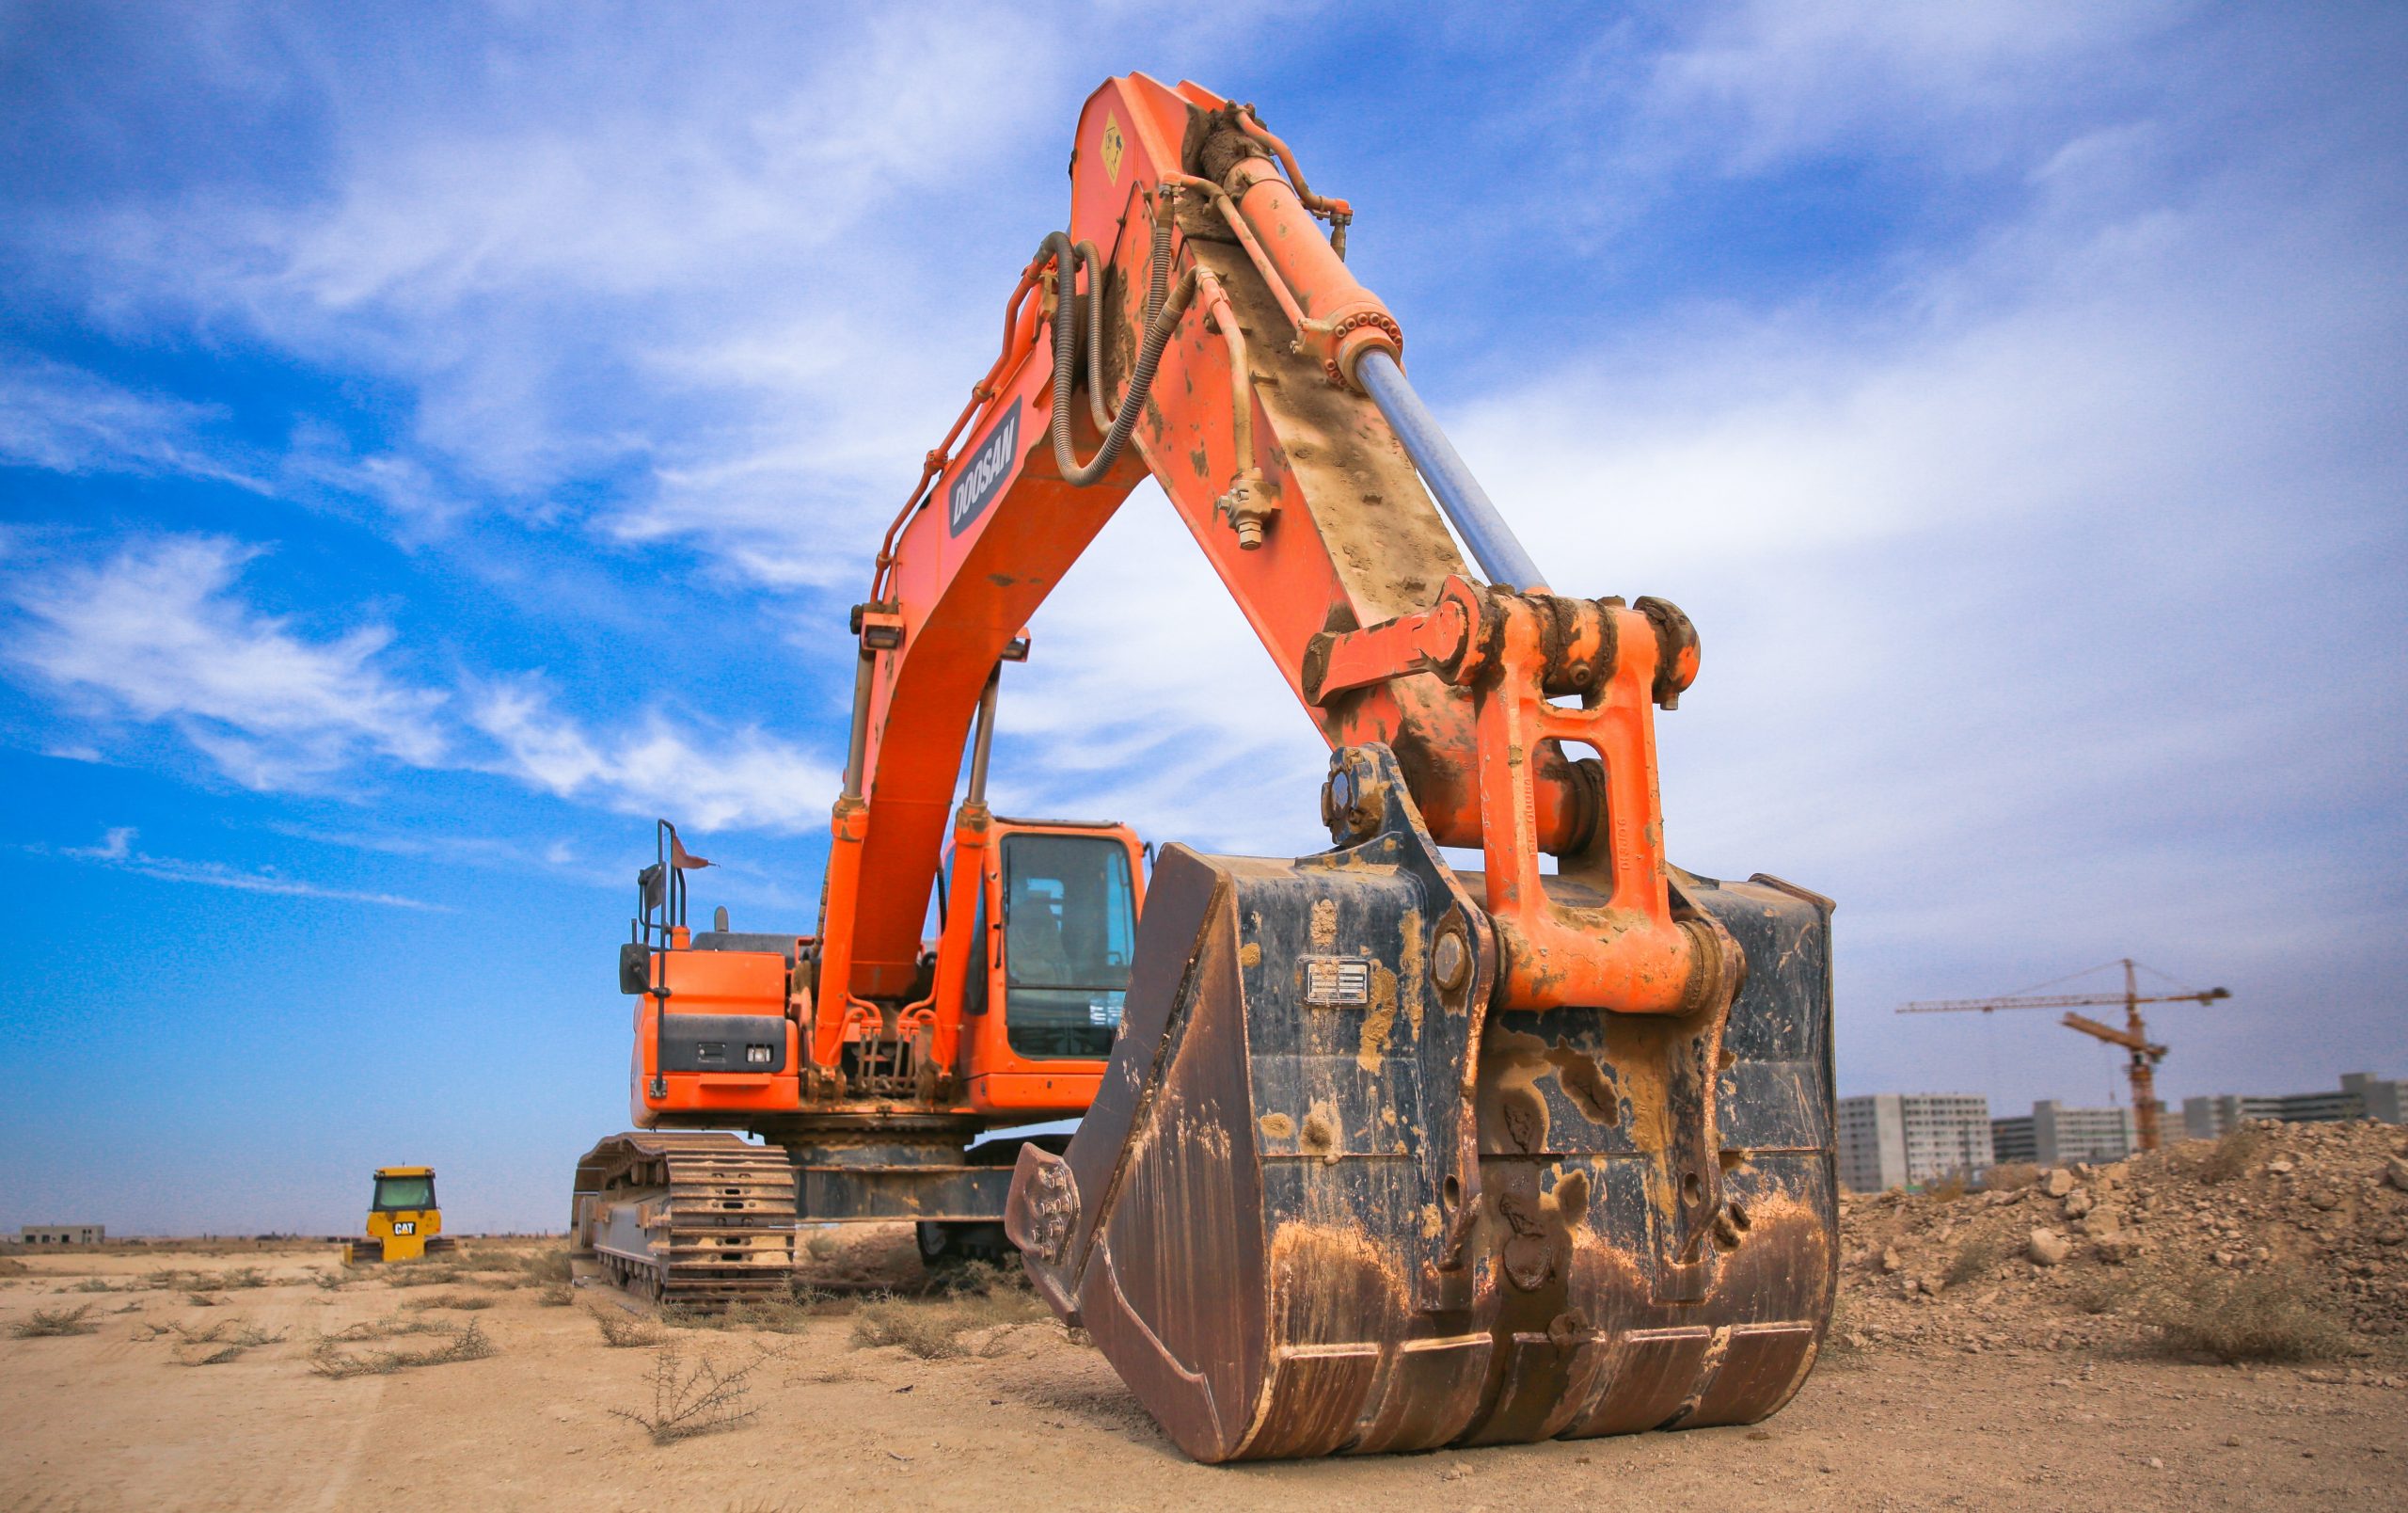 Is Your Machinery Causing Your Business Trouble?